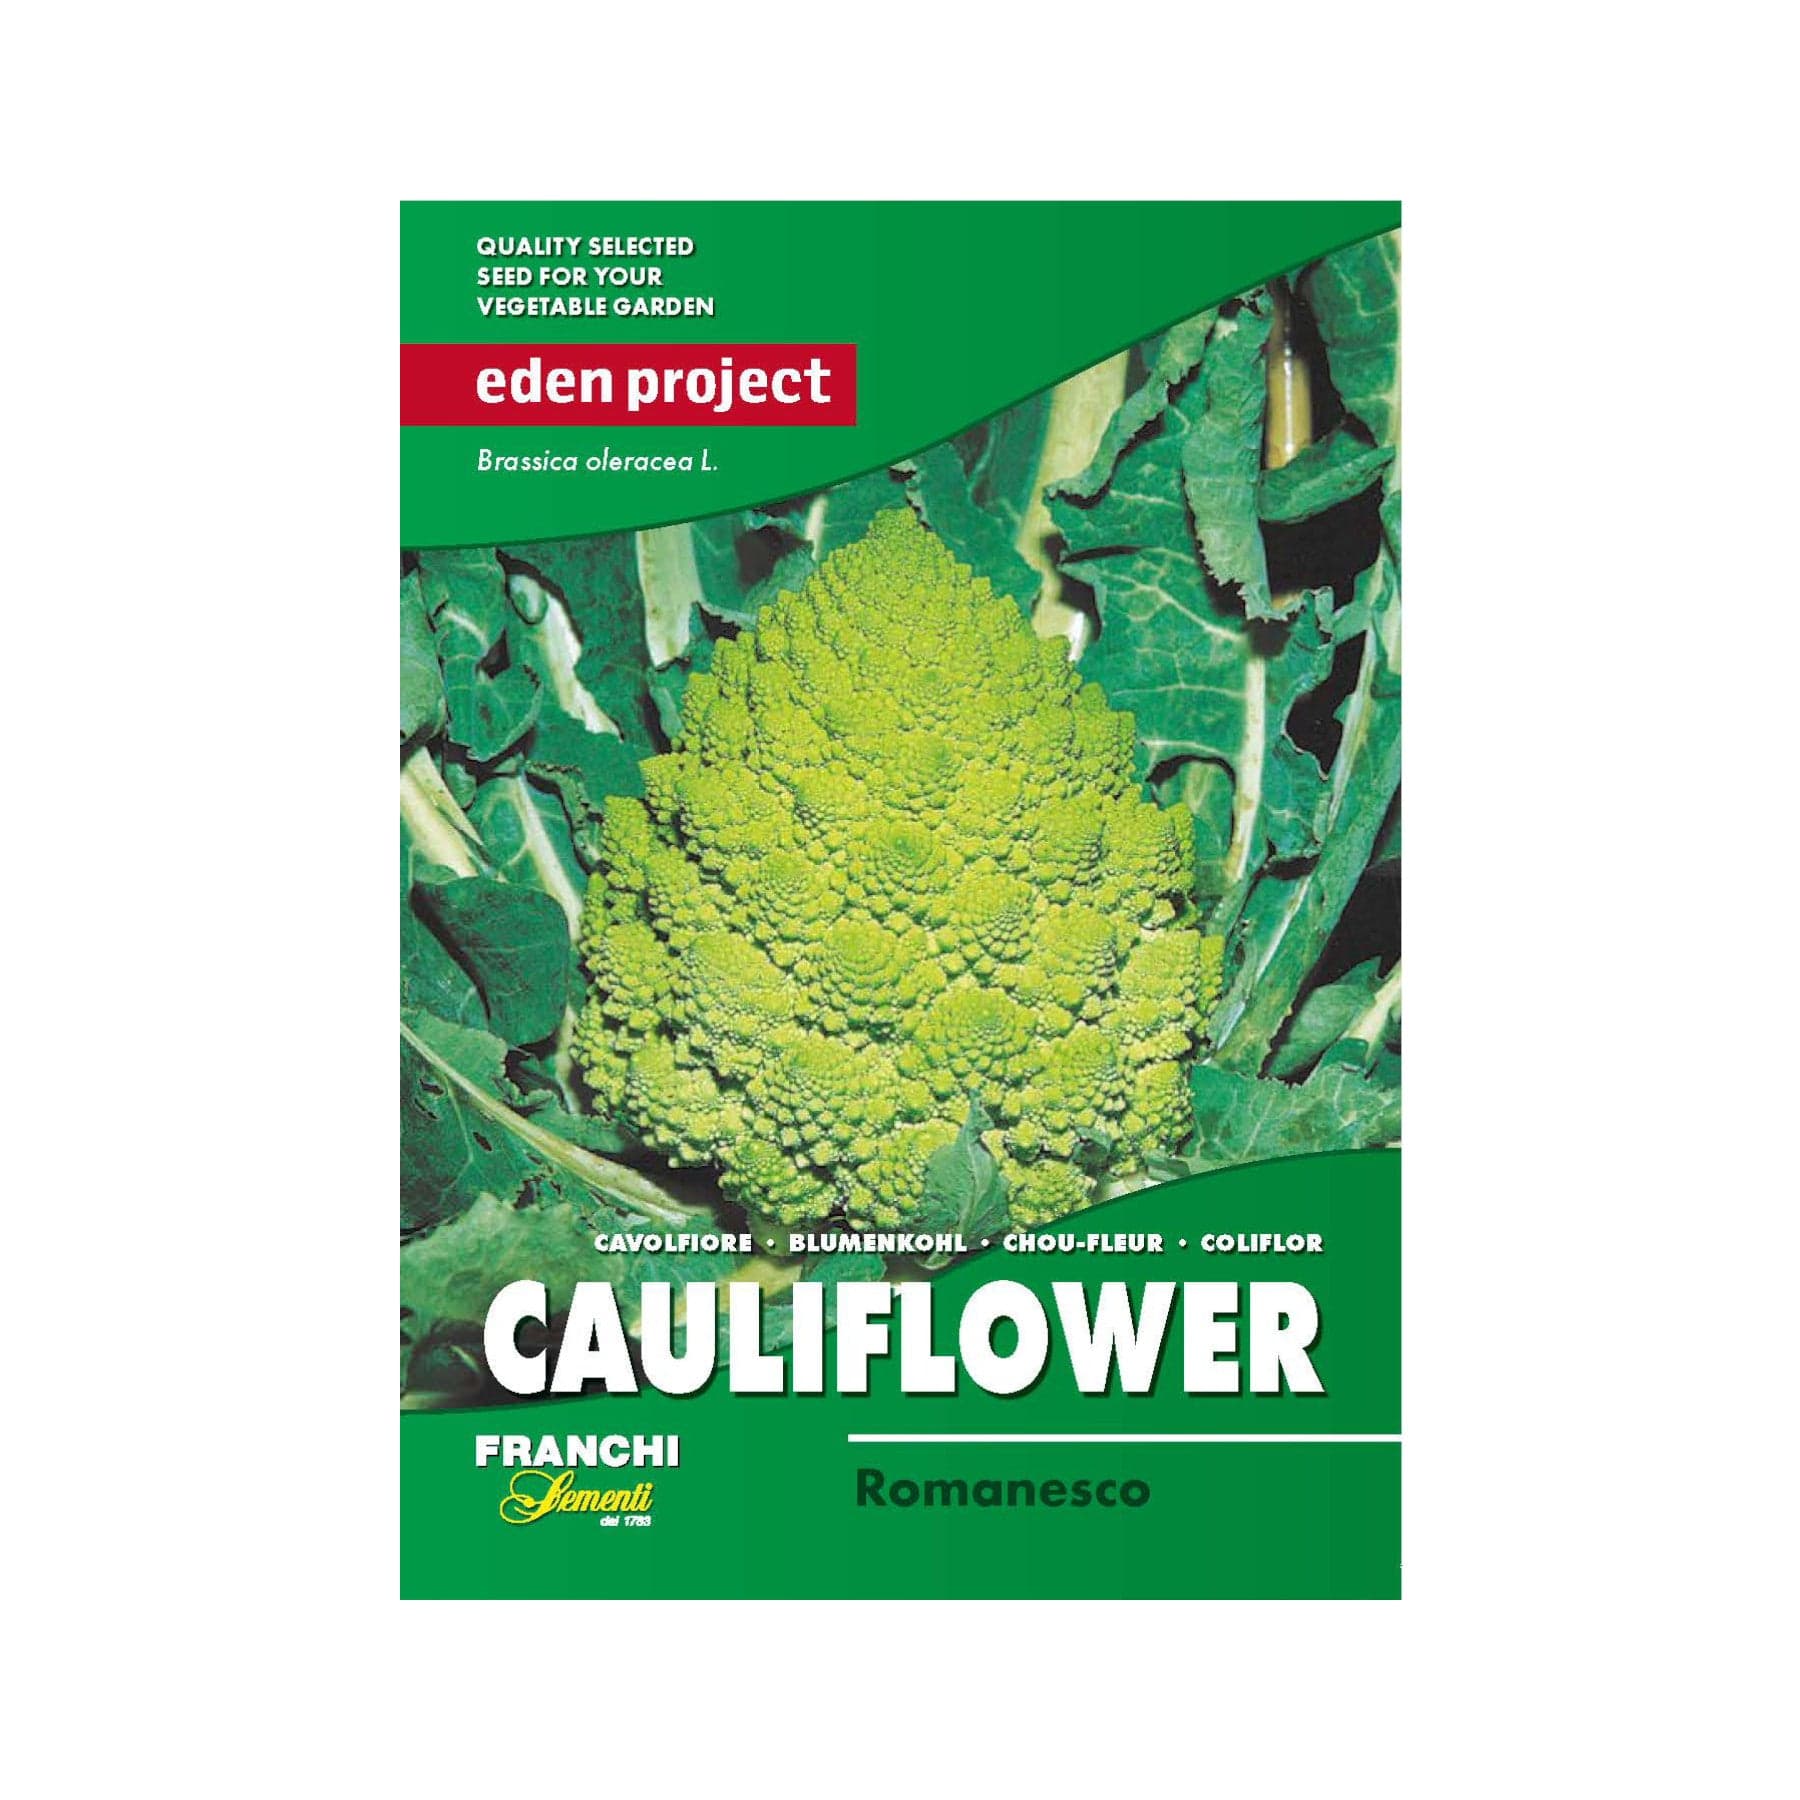 Romanesco cauliflower seed packet from Eden Project, Quality selected seed for vegetable garden, Franchi seeds, Brassica oleracea, Green packaging with cauliflower image.